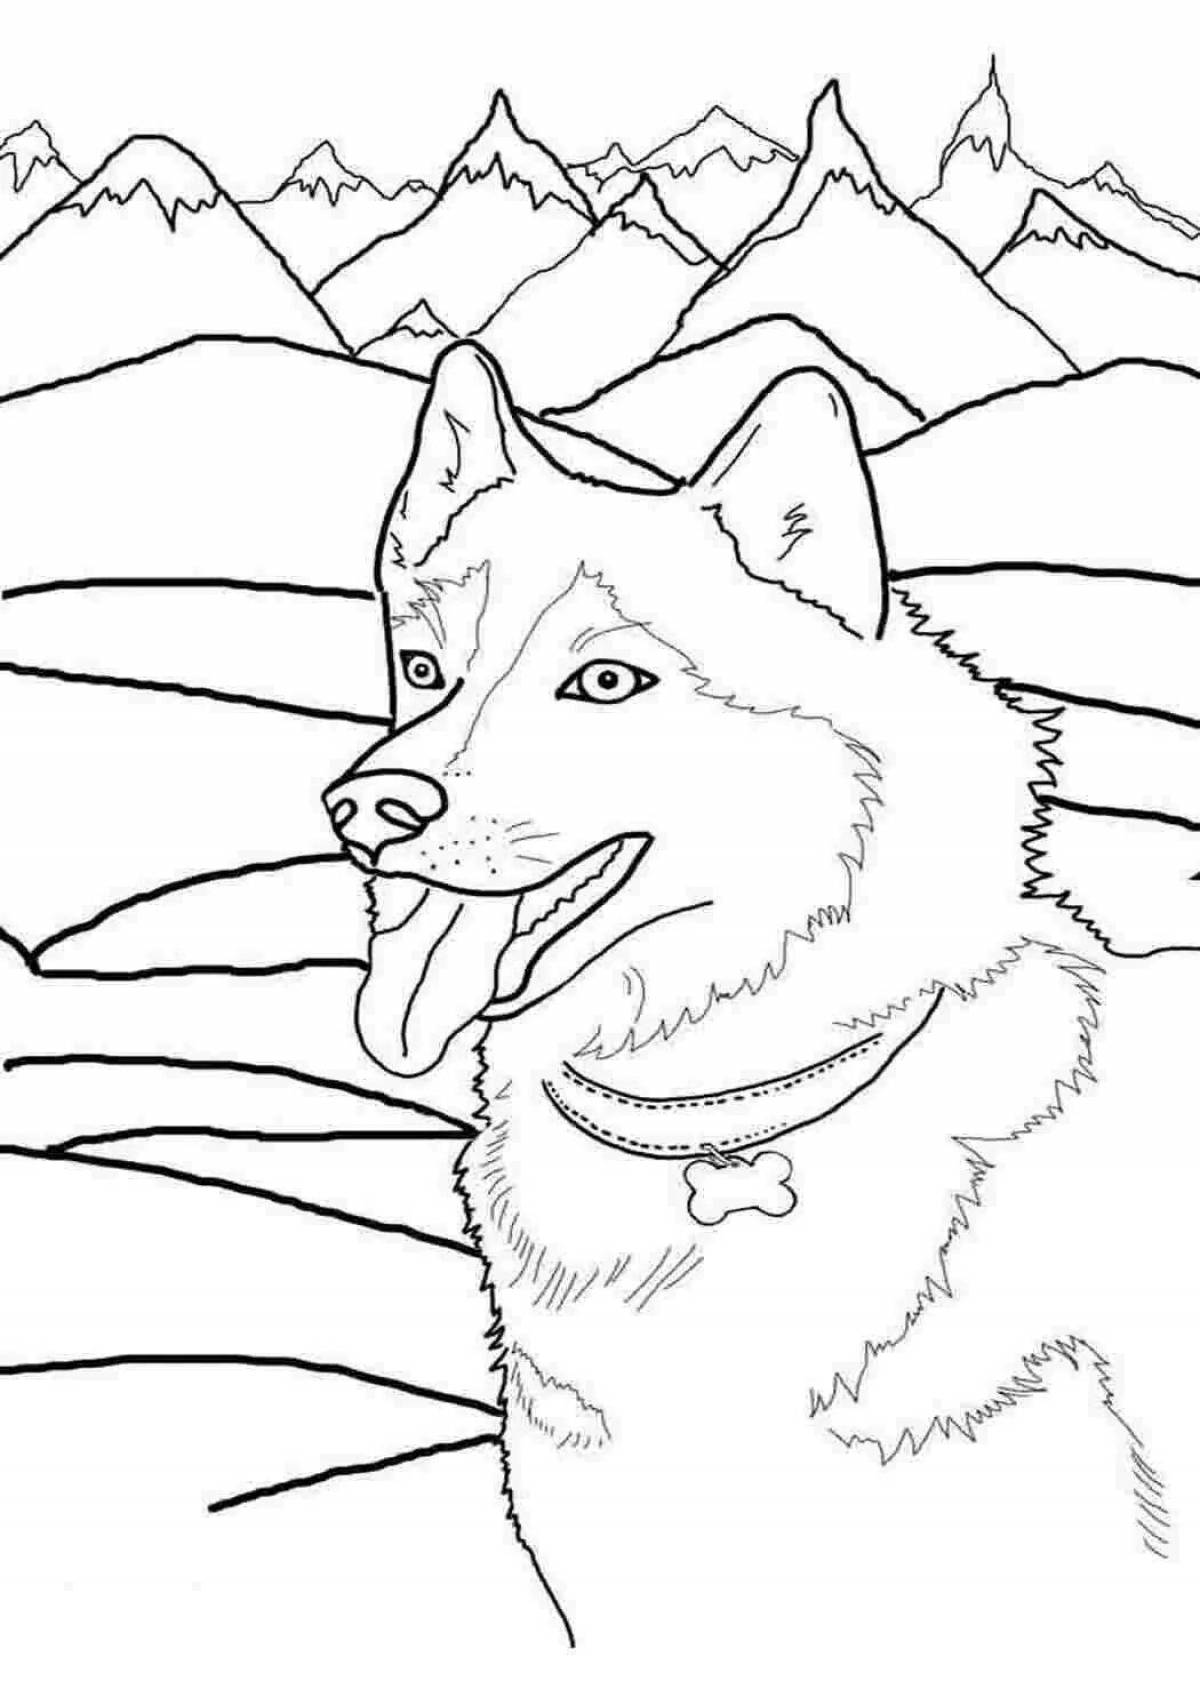 Majestic husky coloring book for kids